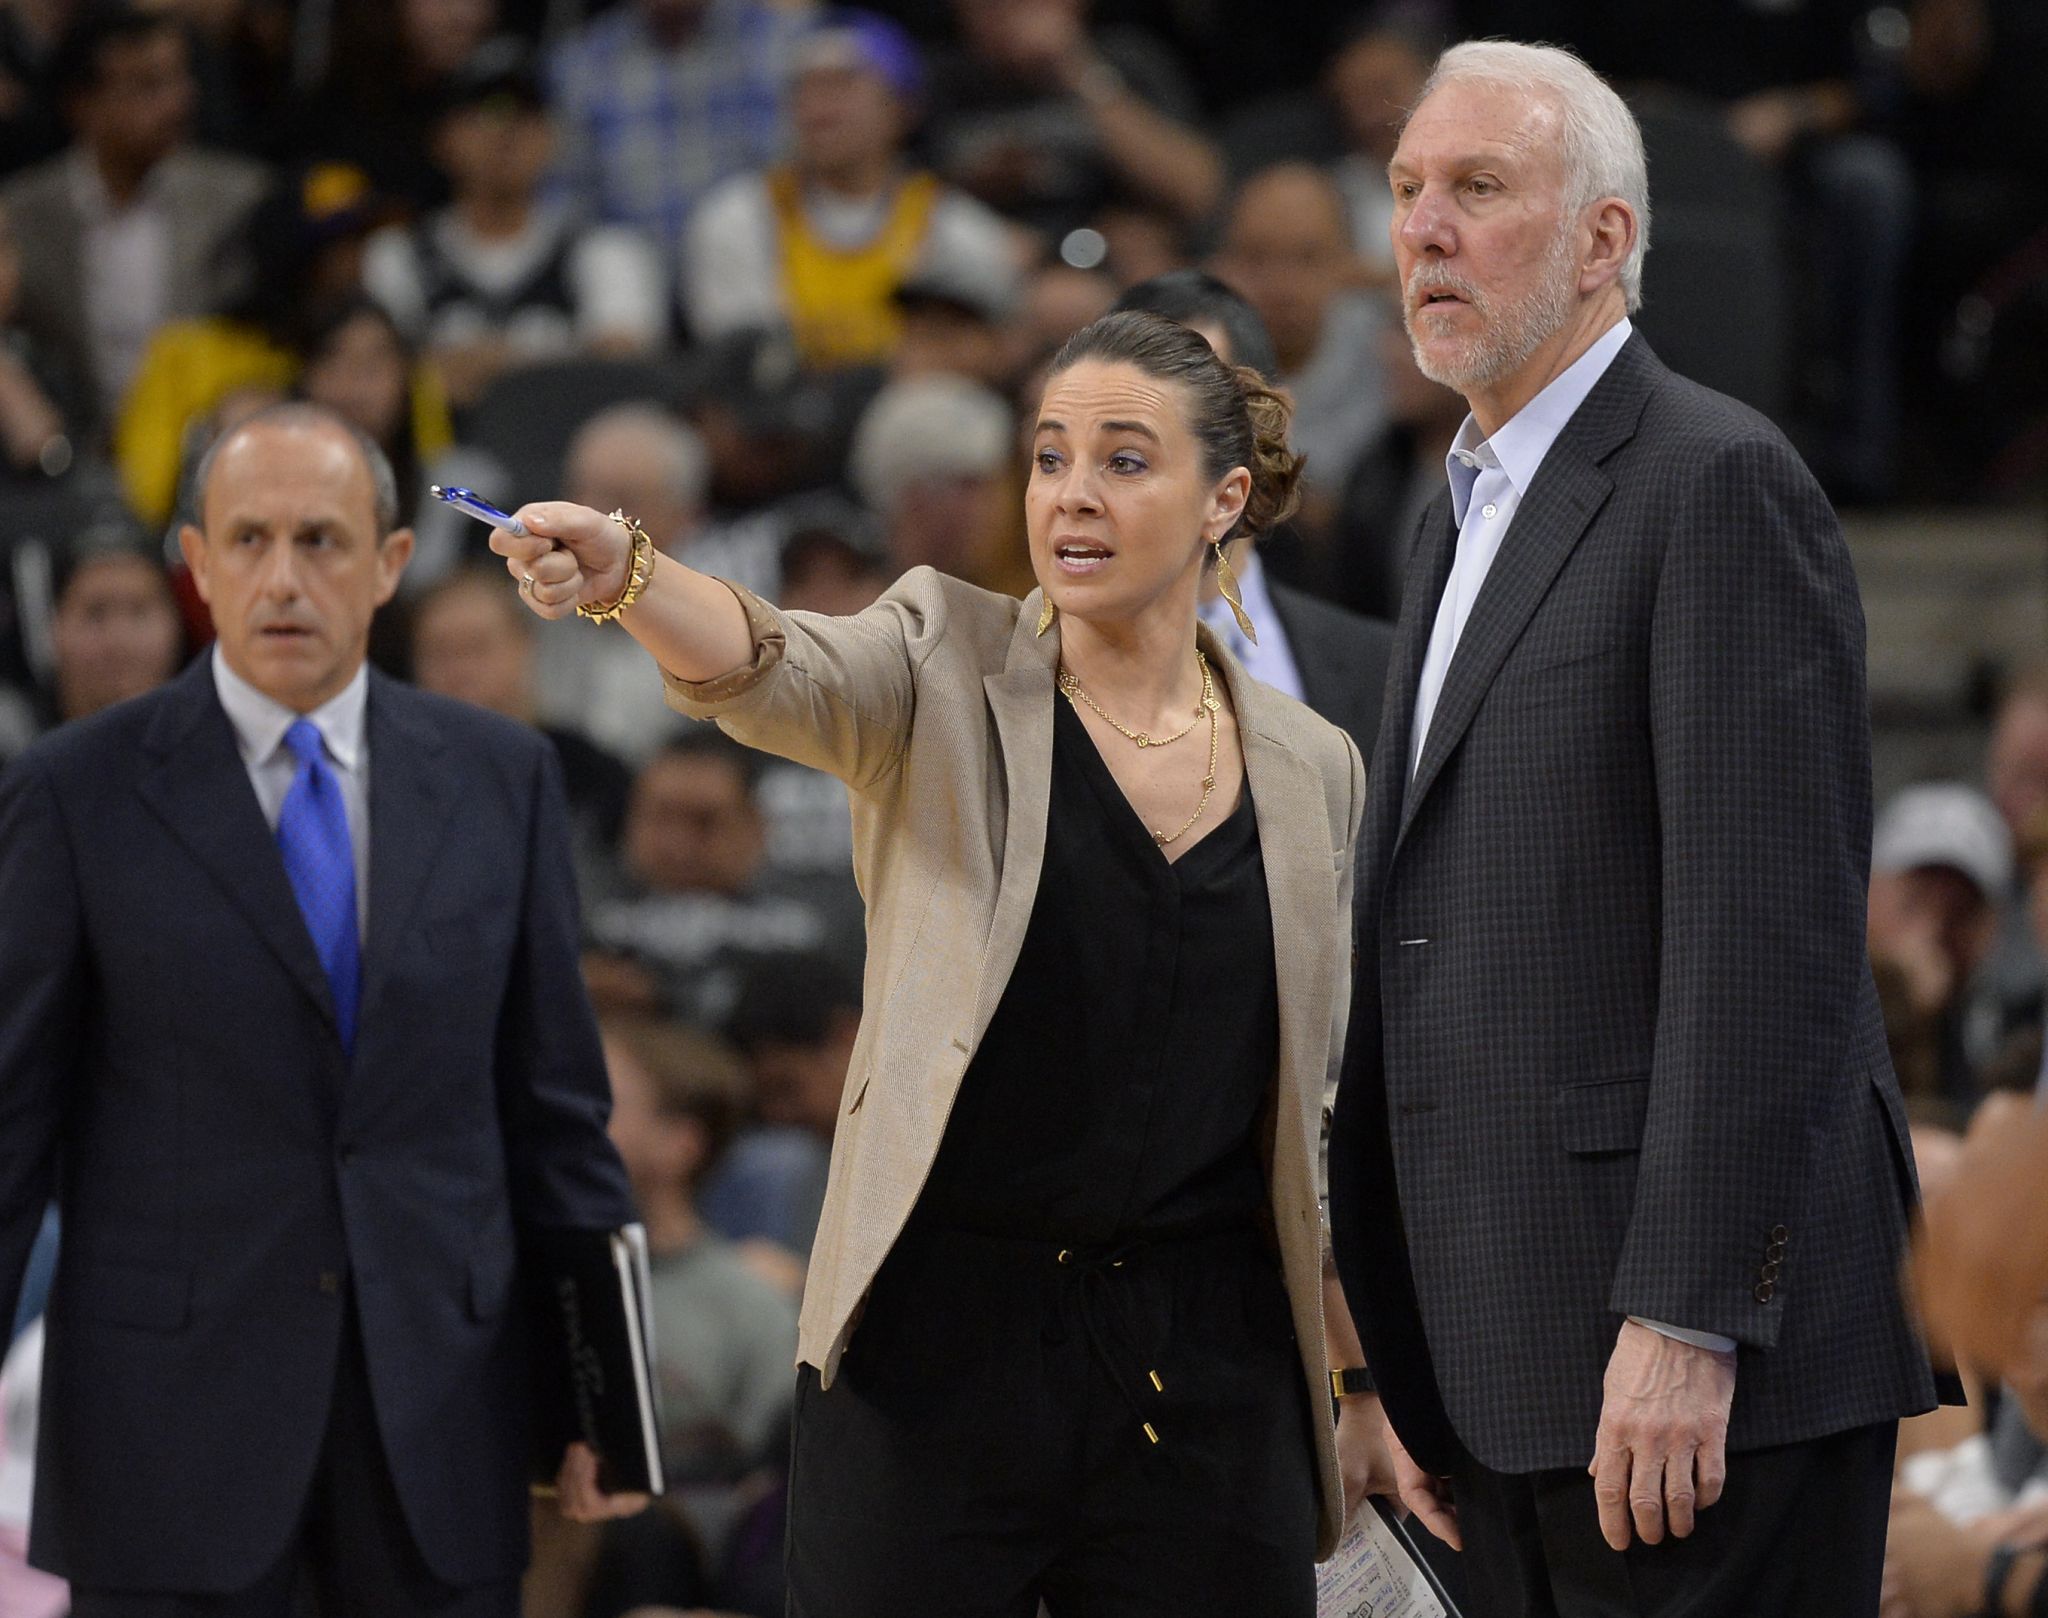 Gregg Popovich on Becky Hammon: 'She's a special, special woman'